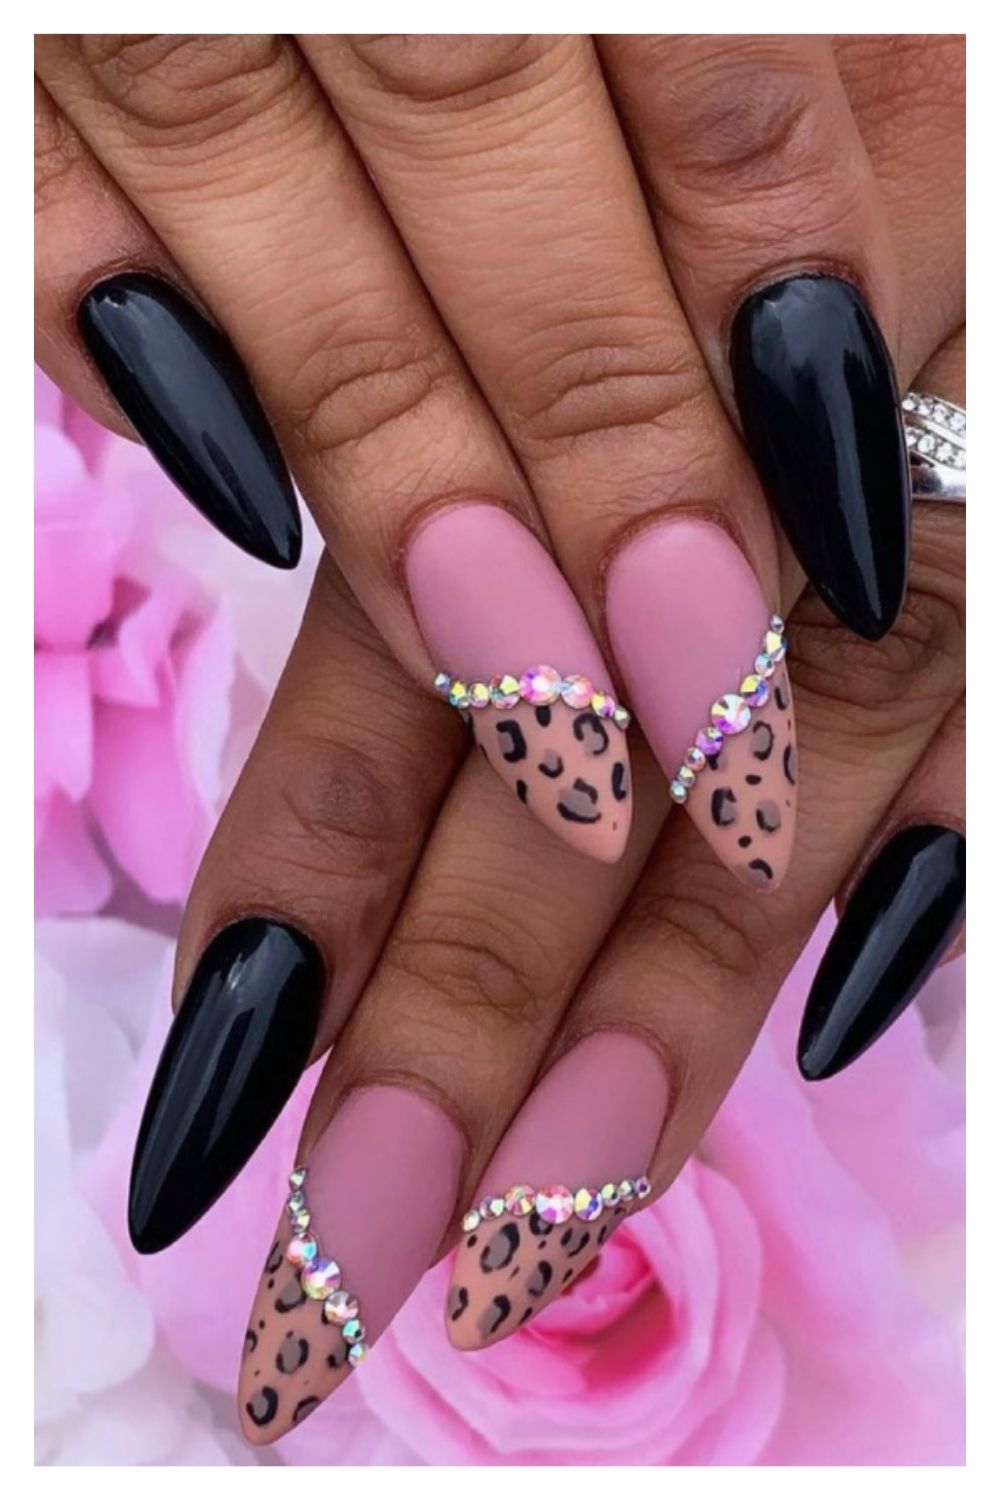 Black and leopard almond nails